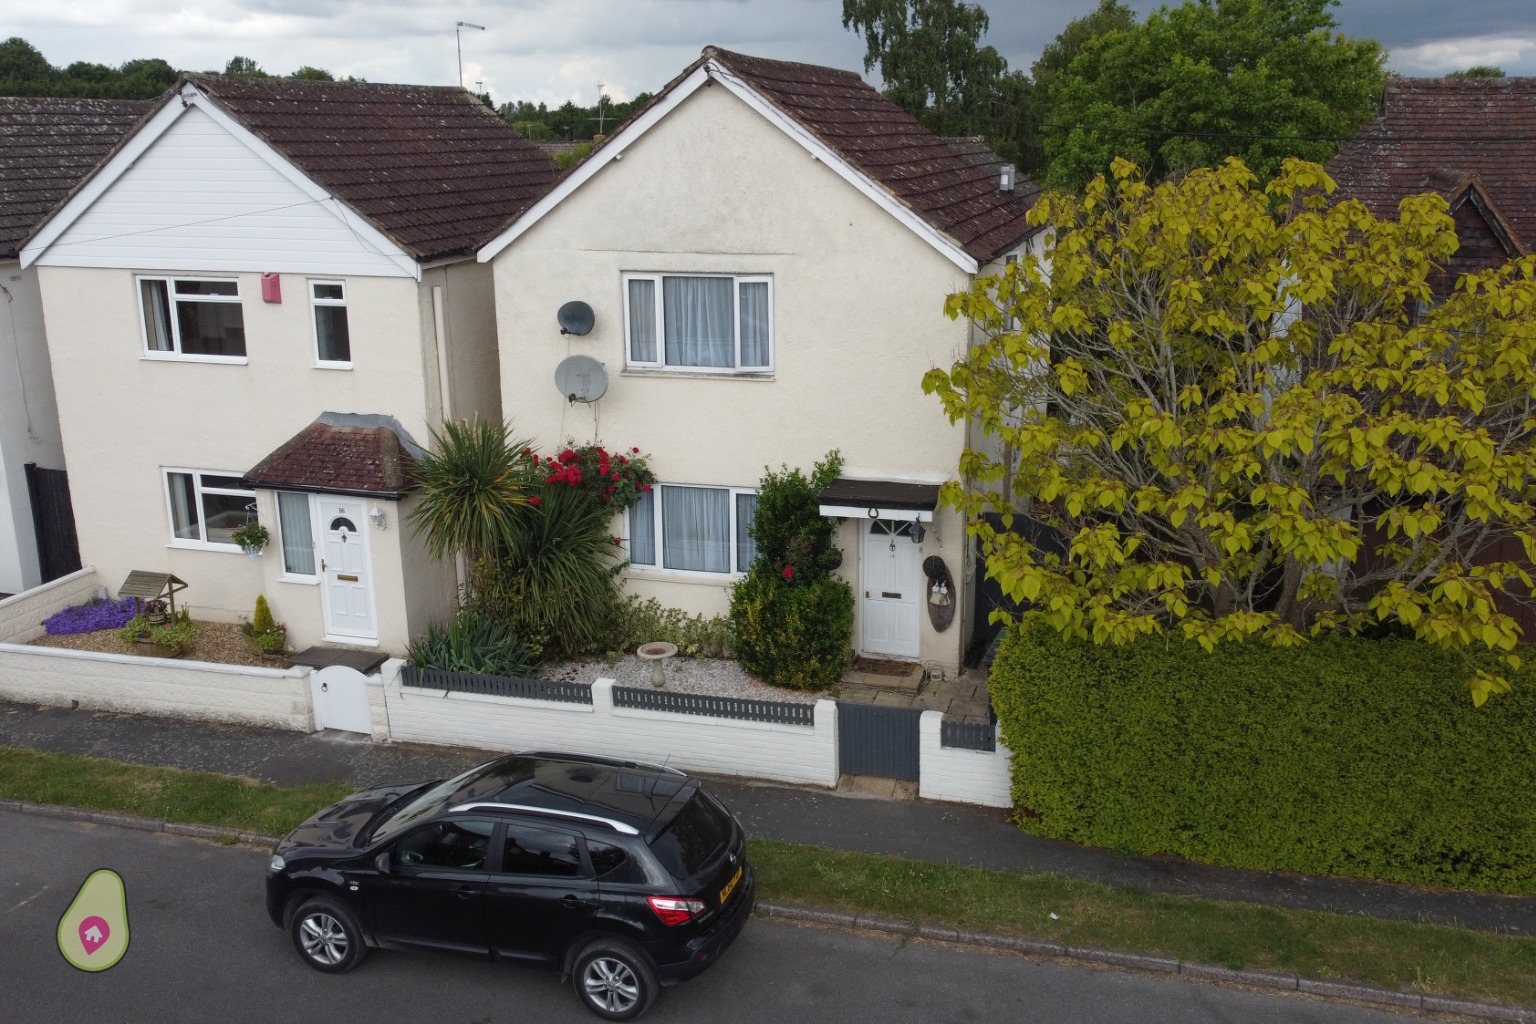 Located in a very popular location is this three double bedroom detached family home, with three large reception areas, a downstairs cloakroom, refitted family bathroom and a great sized rear garden.  All within walking distance of Frimley Green's amenities!